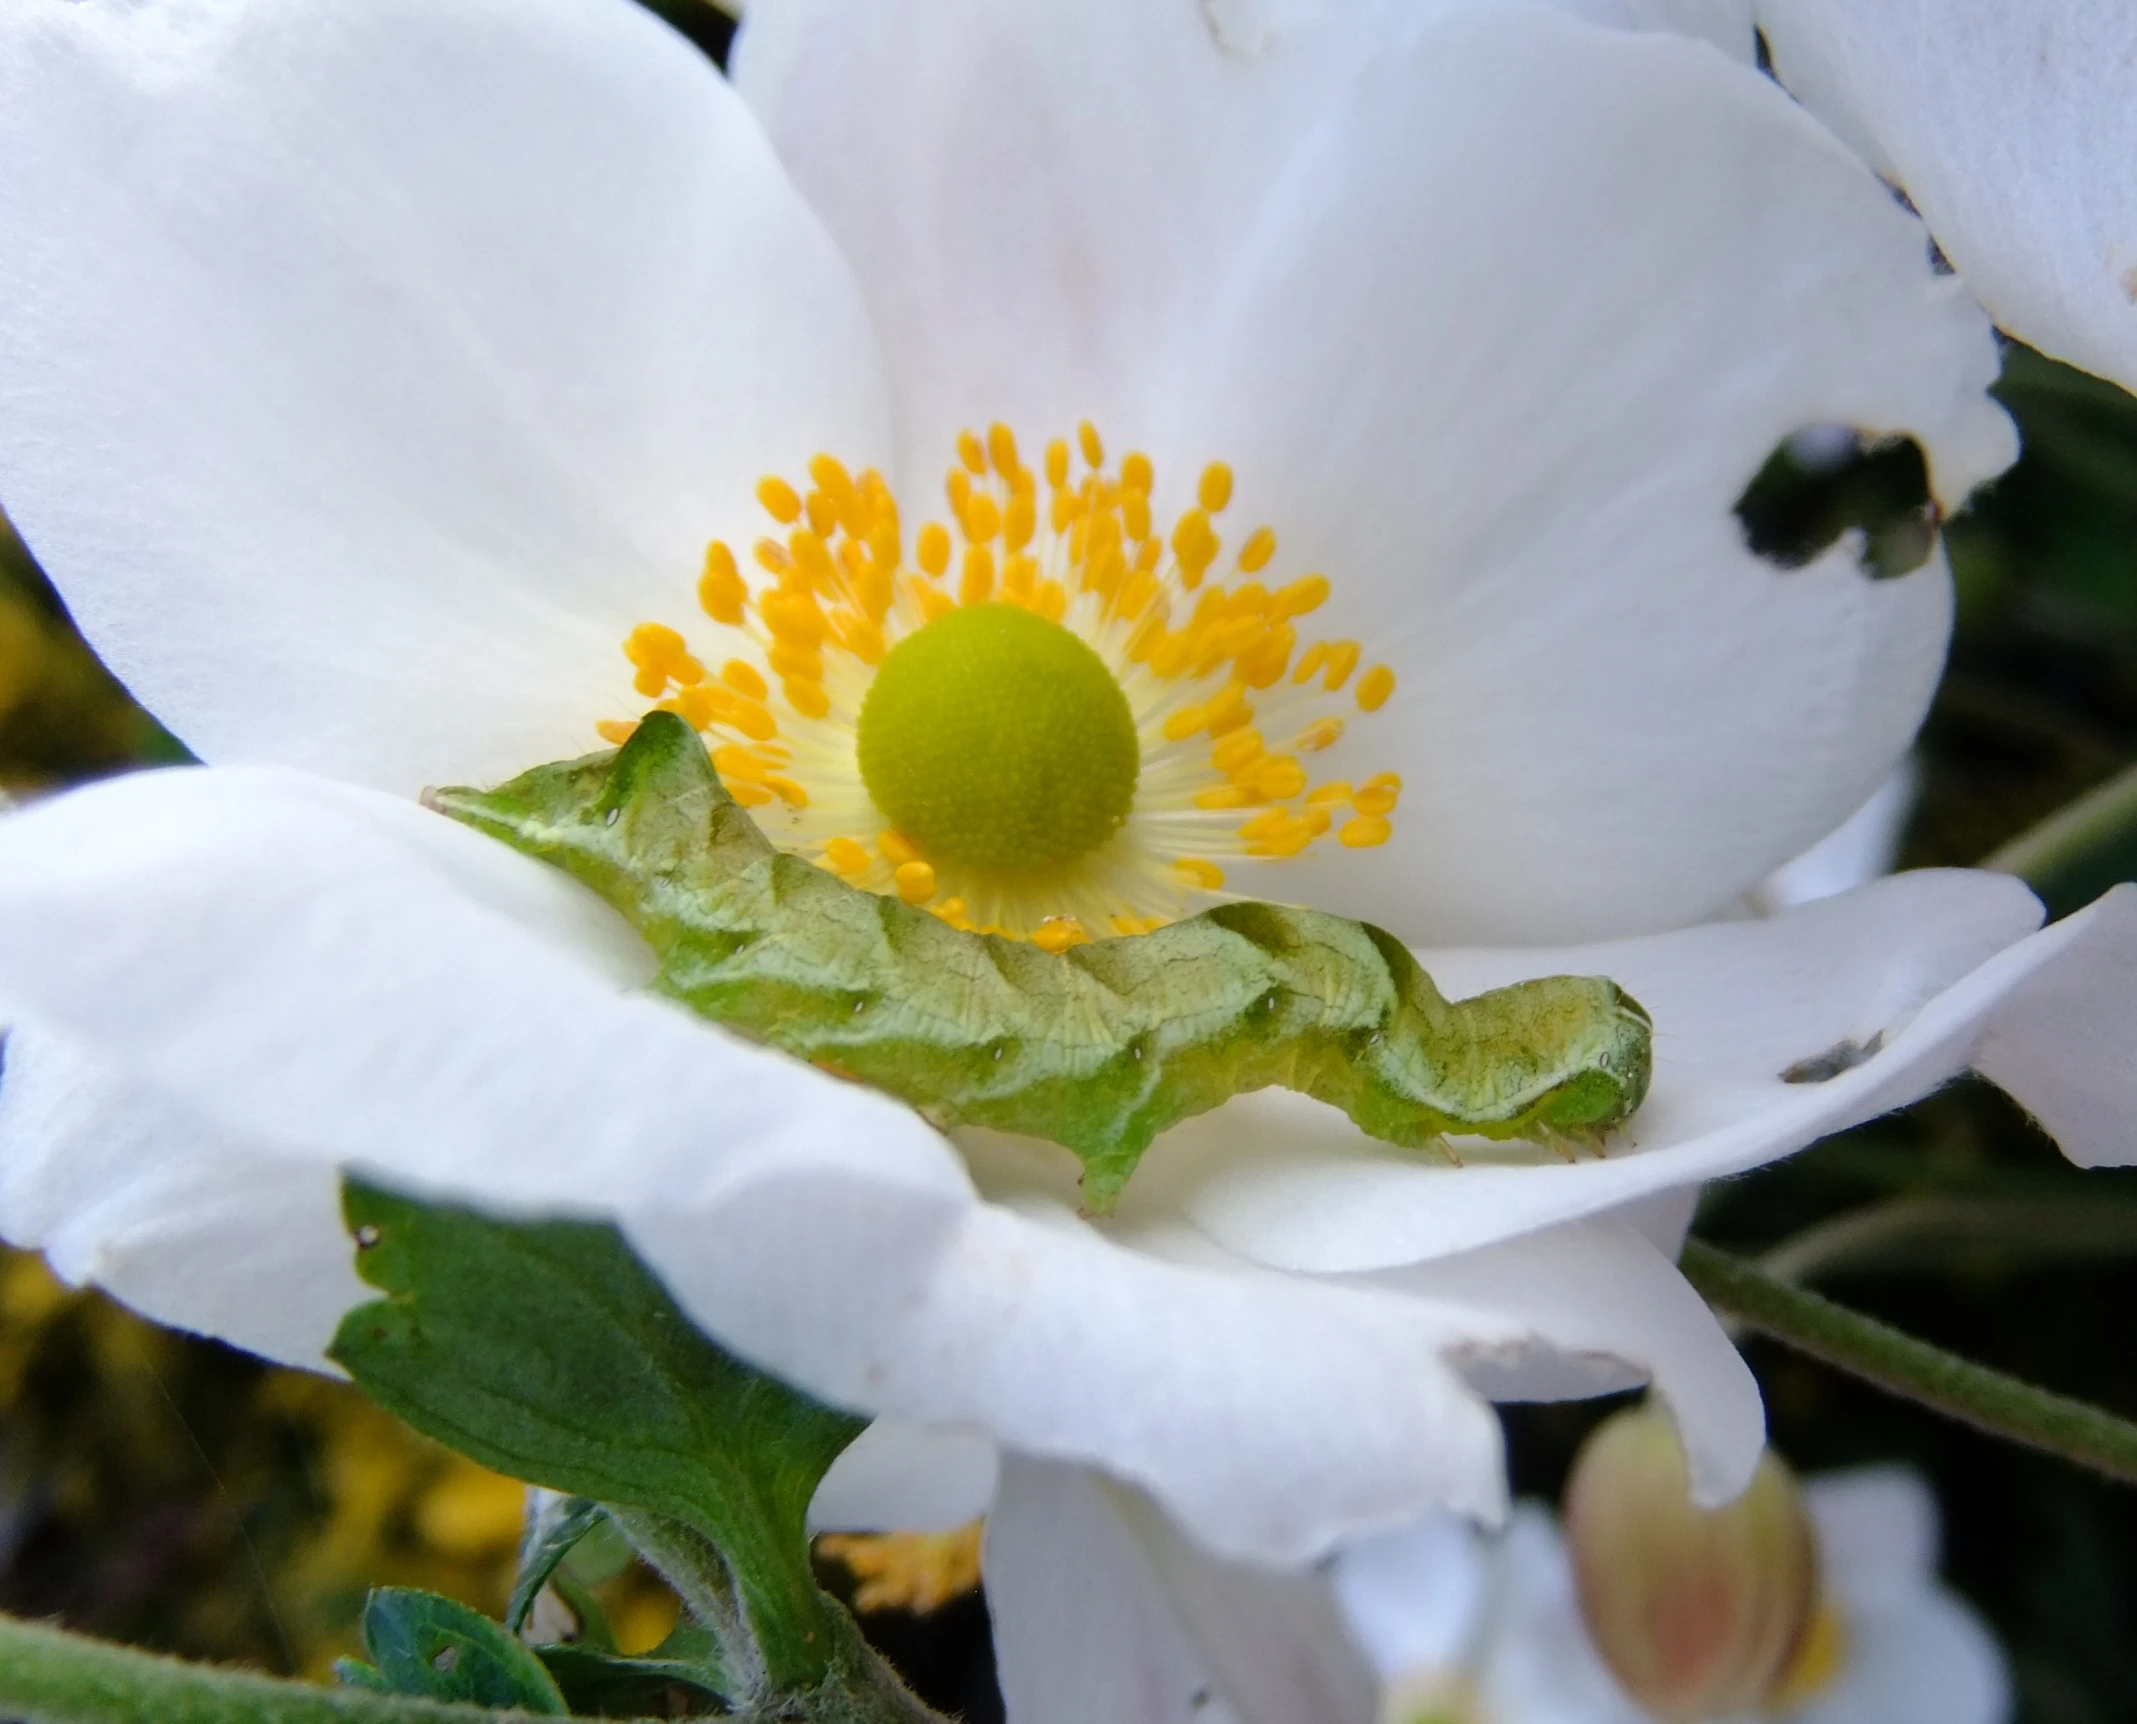 a closeup s of a white flower with yellow stamen